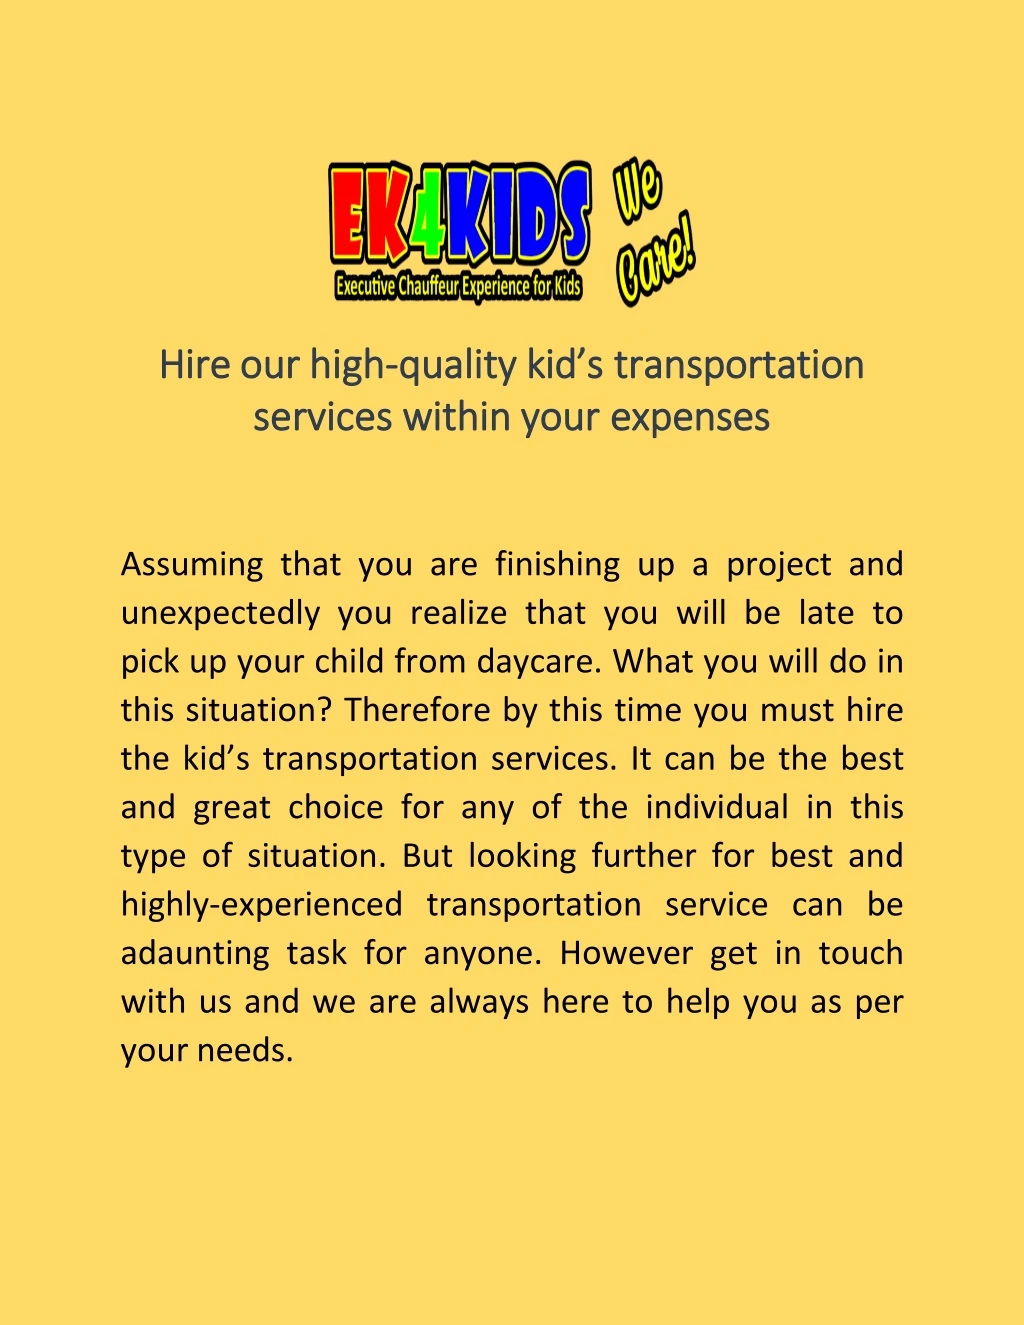 hire our high quality kid s transportation services within your expenses